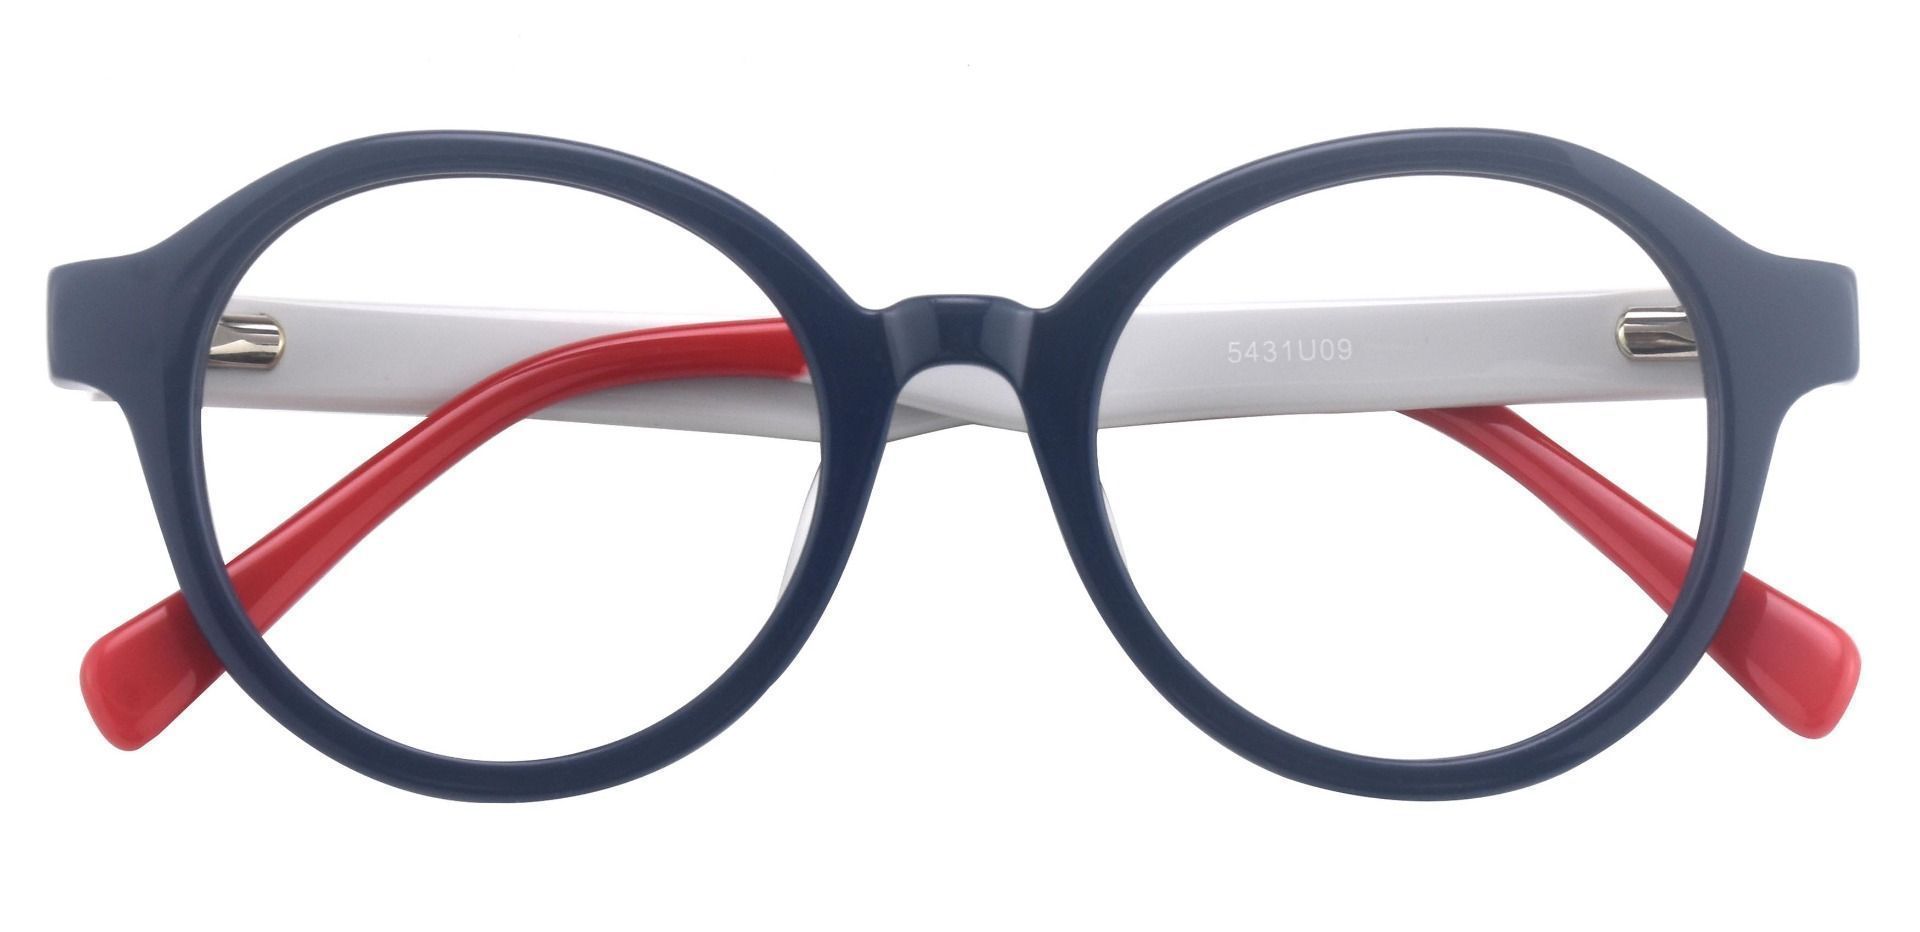 Roxbury Round Reading Glasses - The Frame Is Blue And Red